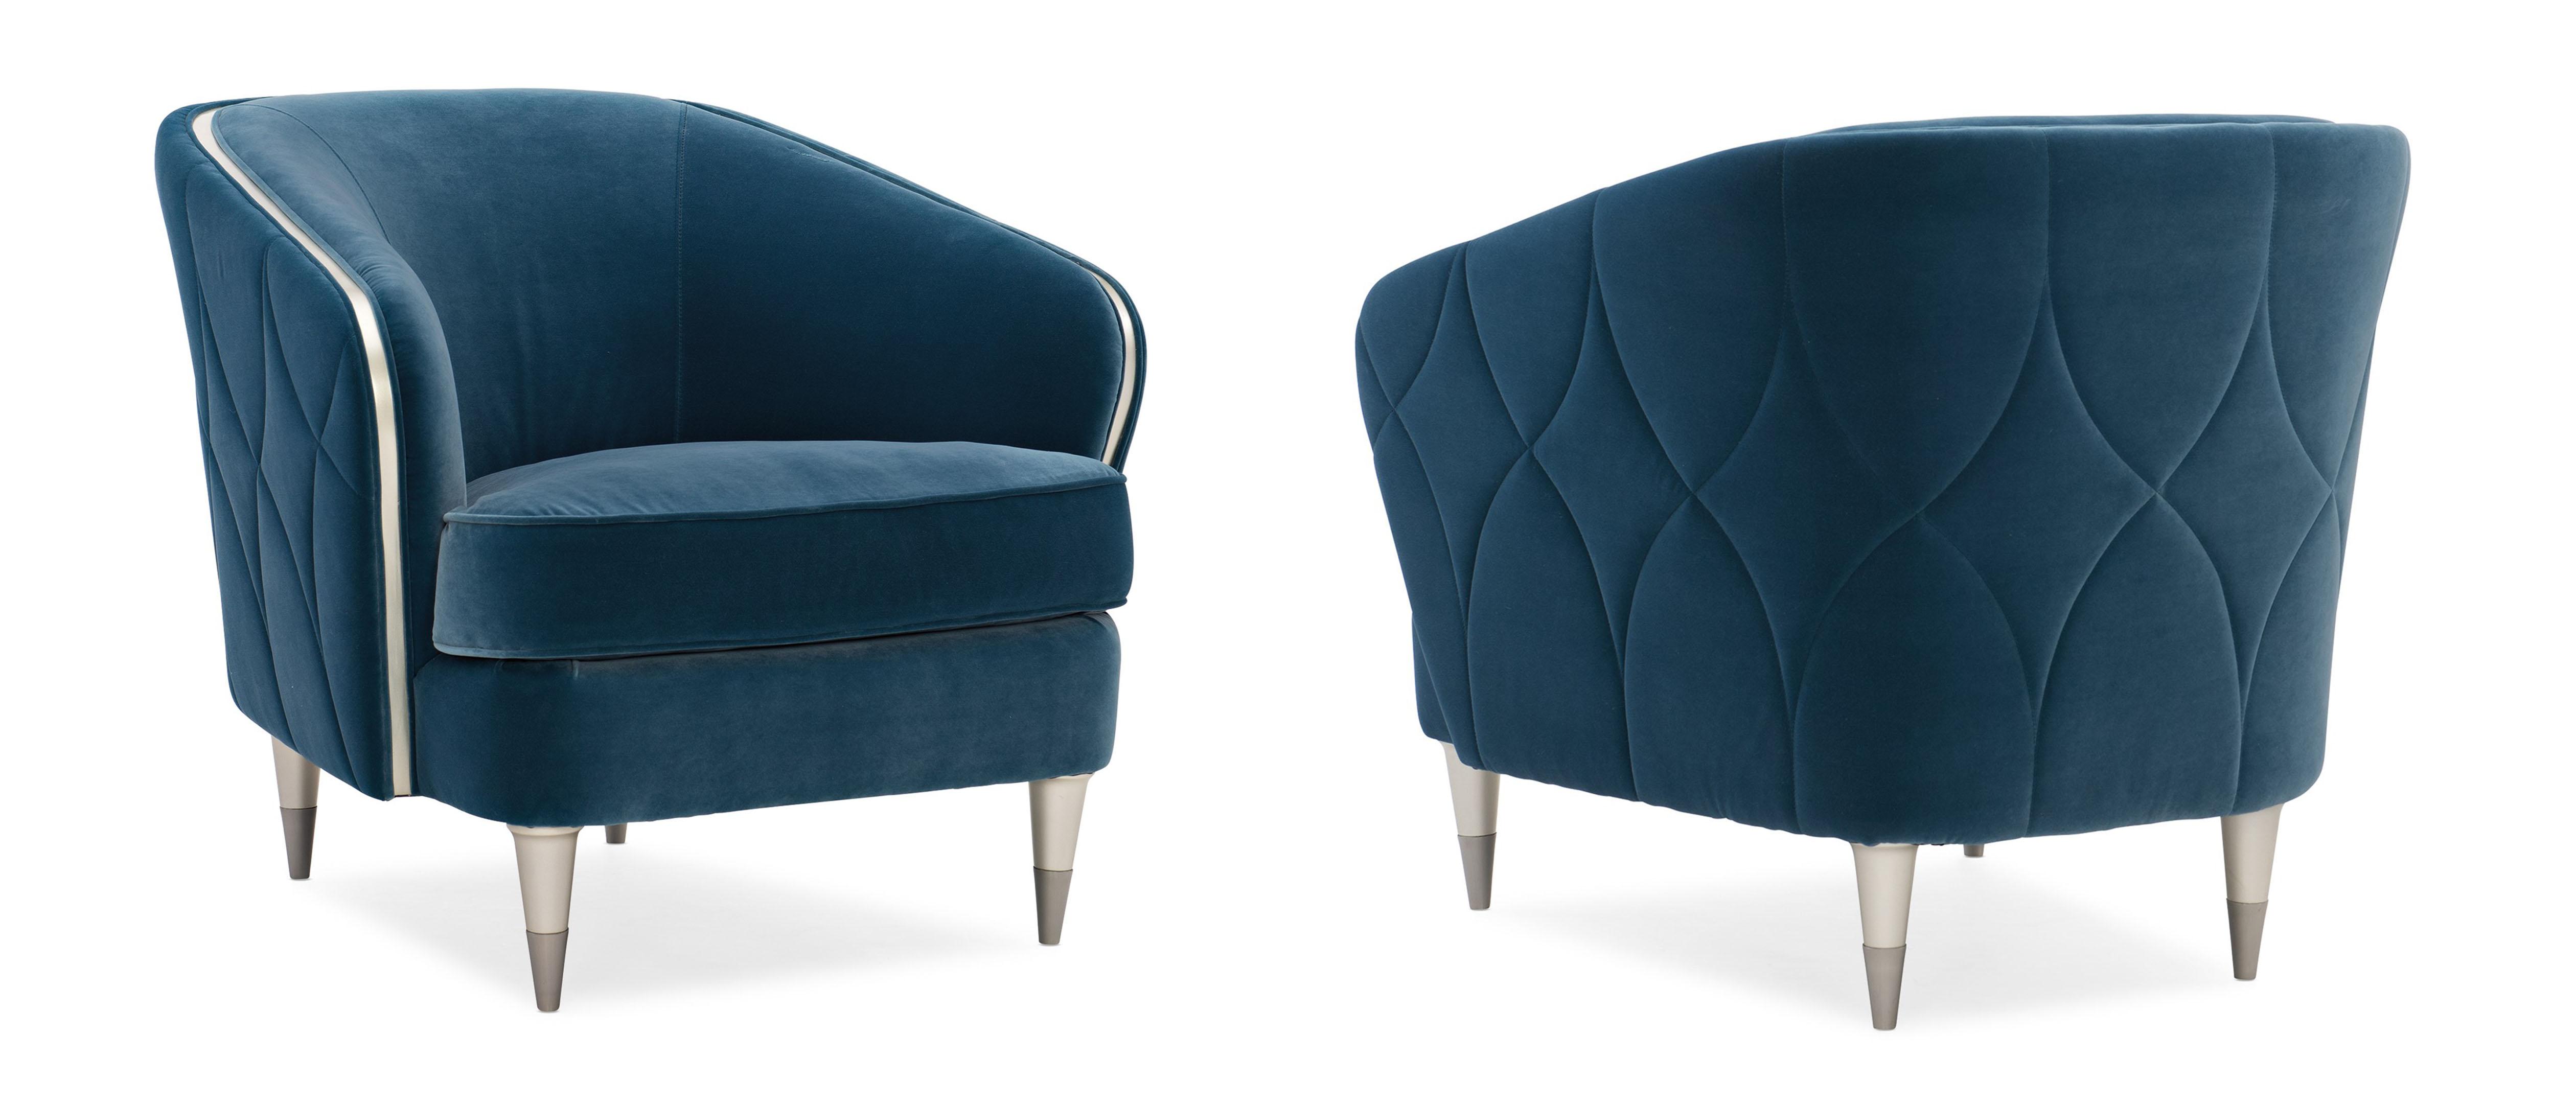 Contemporary Accent Chair HOUR TIME UPH-419-036-A-Set-2 in Prussian blue Velvet